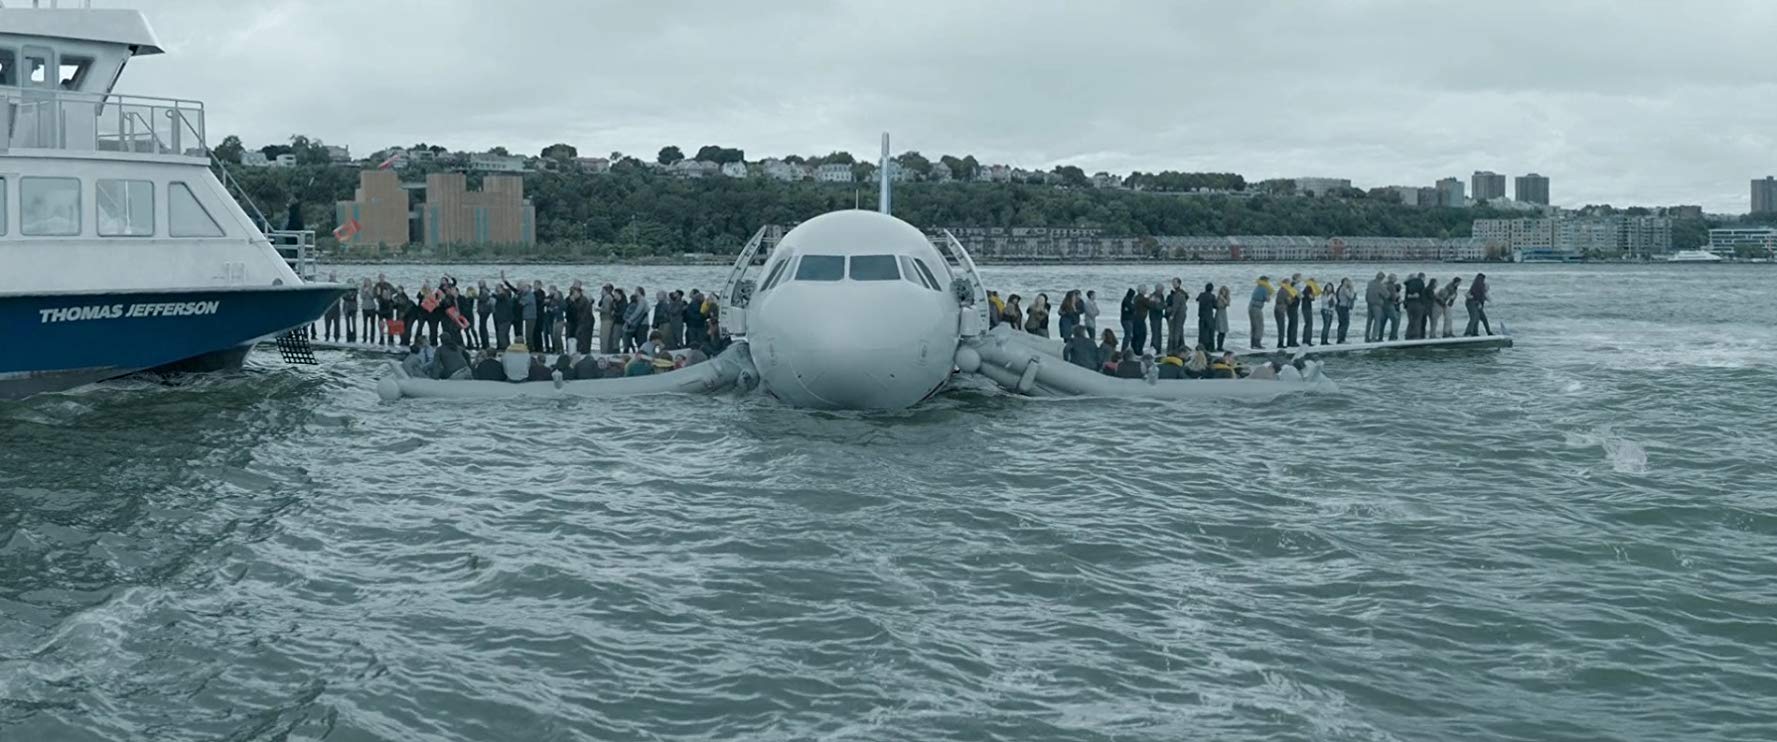 23. Sully, “Chesley ‘Sully’ Sullenberger” (2016)